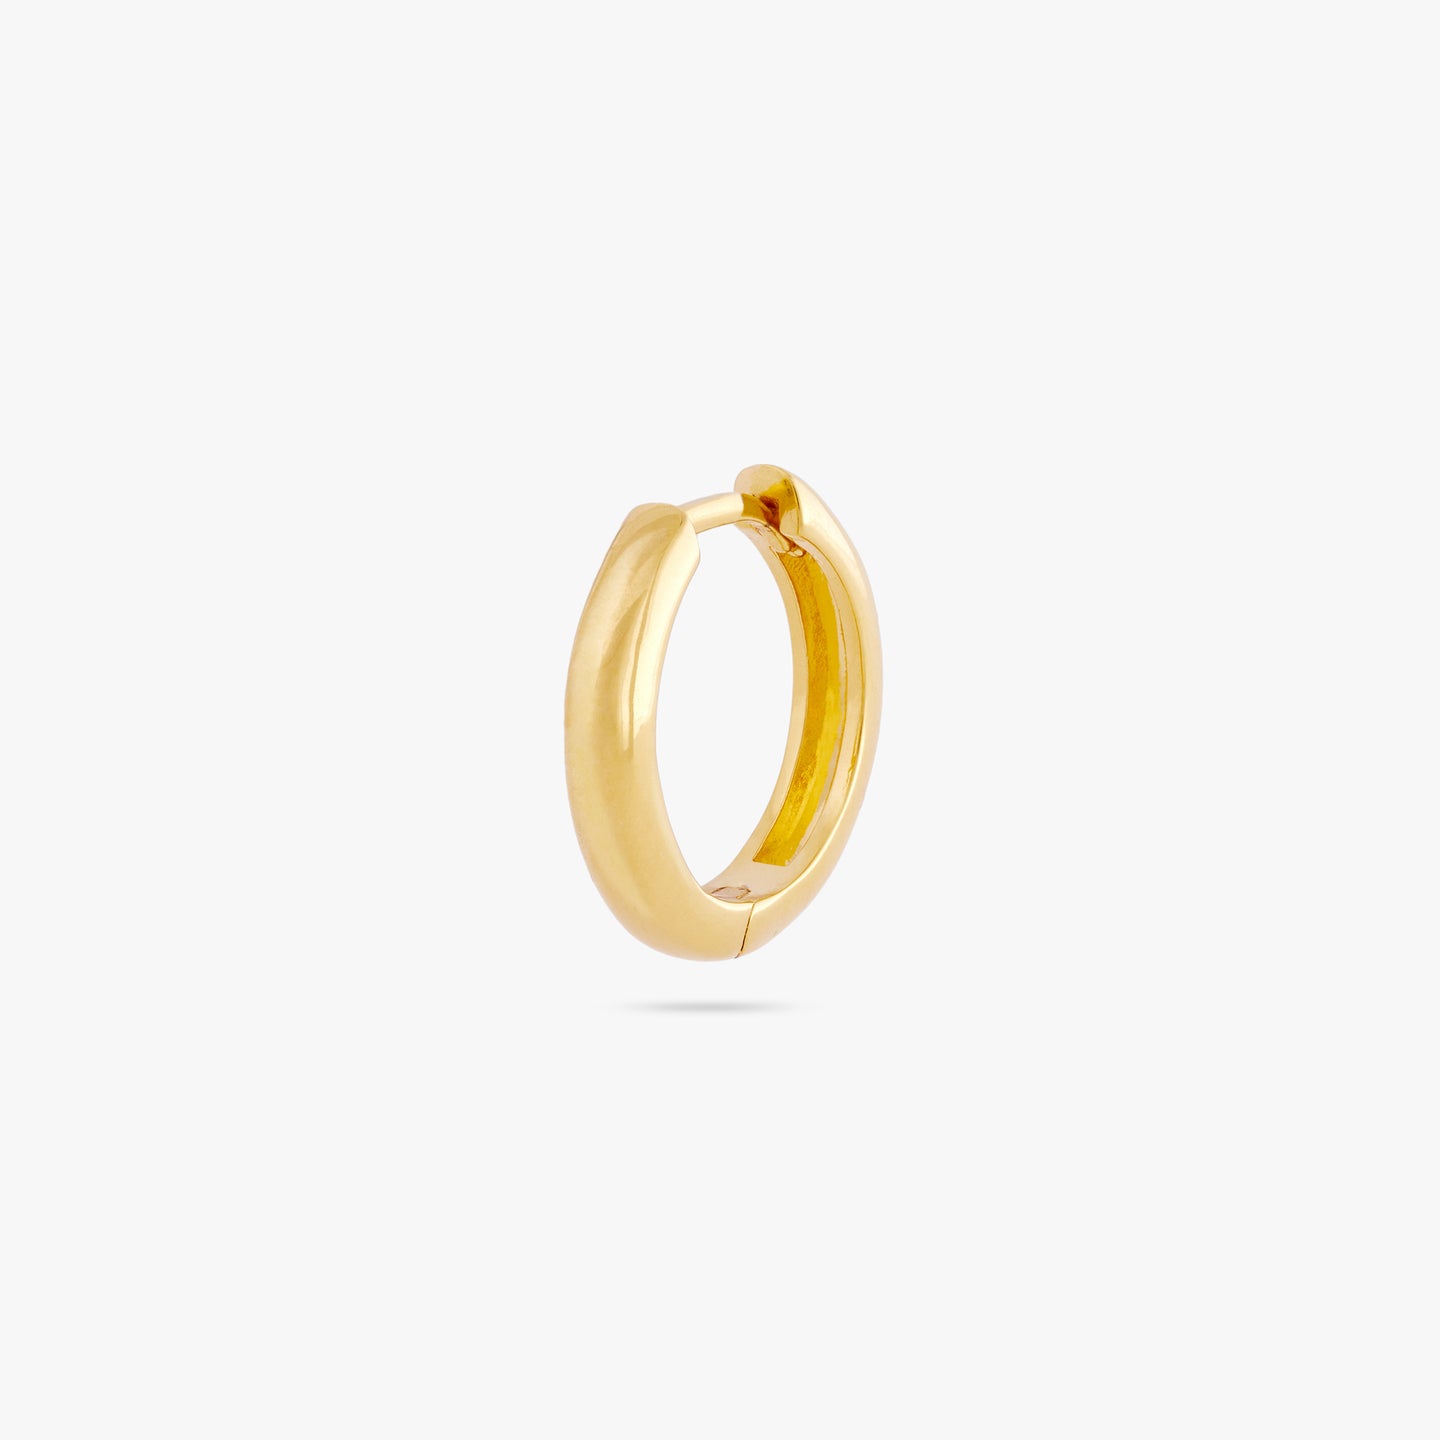 Small bulky and chunky shaped gold hoop color:null|gold